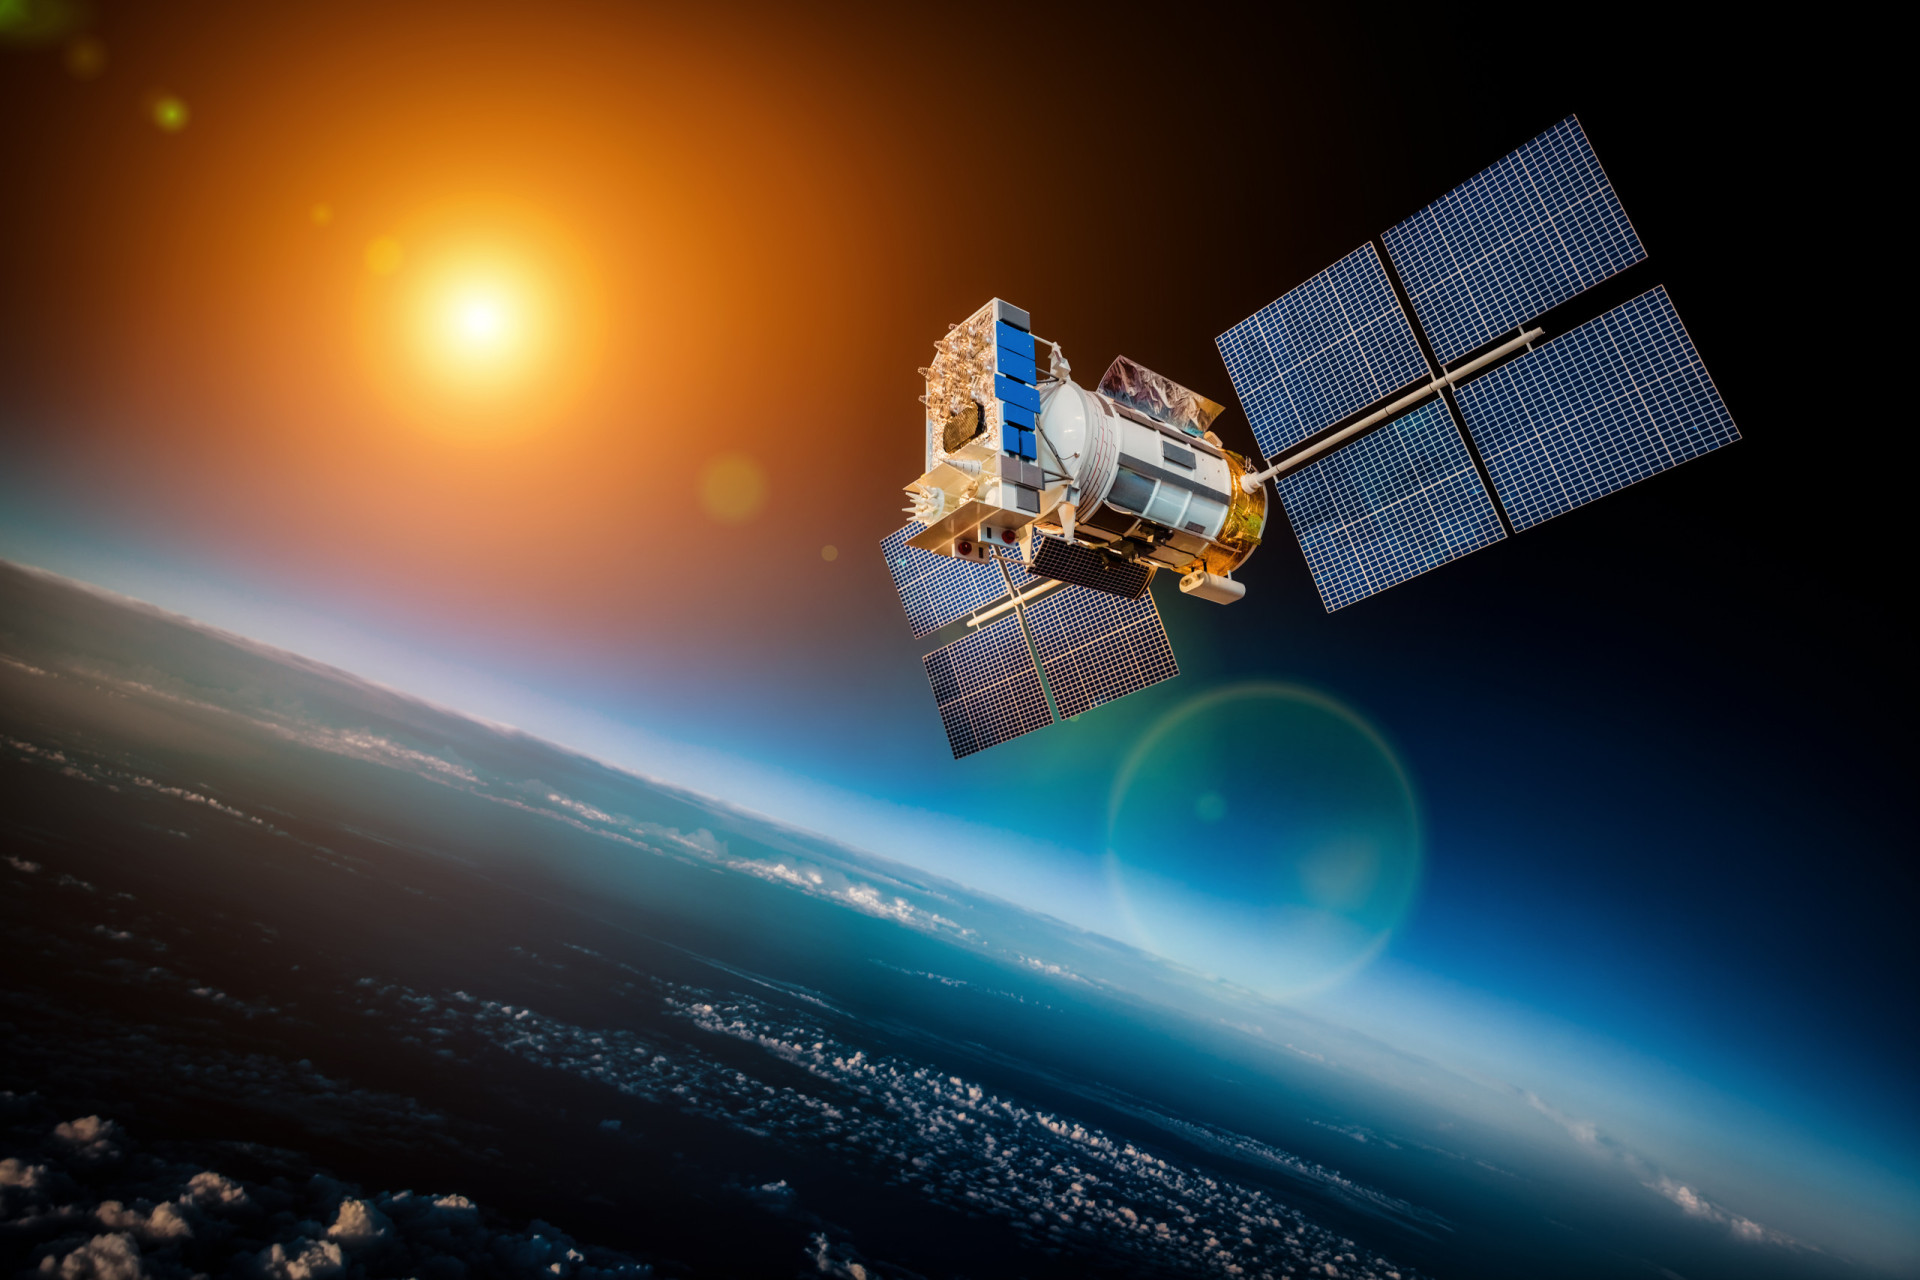 <p>For us, day-to-day, the relativistic effects of time are too subtle to notice. But they actually do affect the satellites used for global positioning system (GPS).</p>